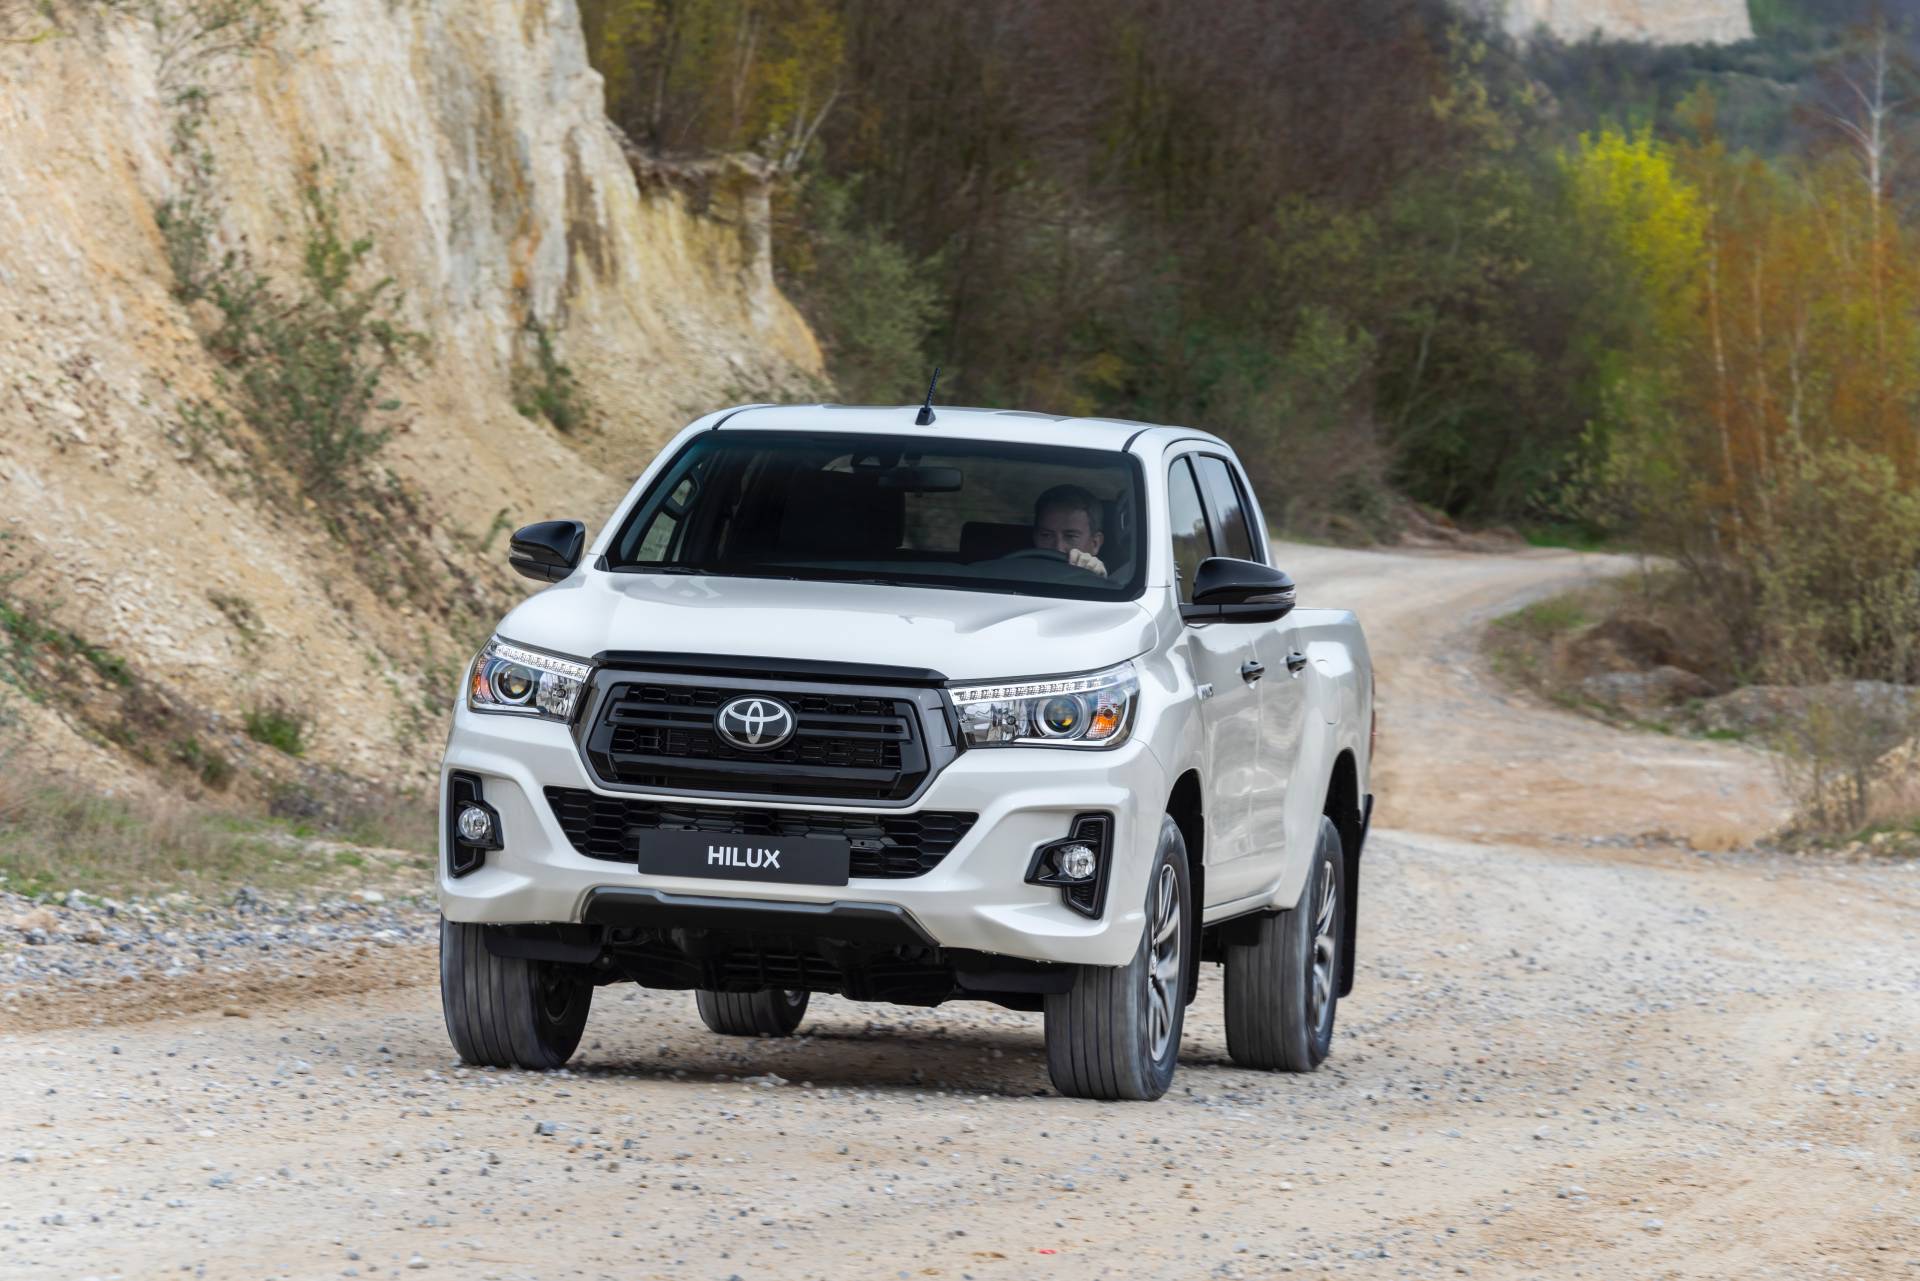 Toyota Wants To Make The Hilux A "Lifestyle Choice" With 2019 Special ...